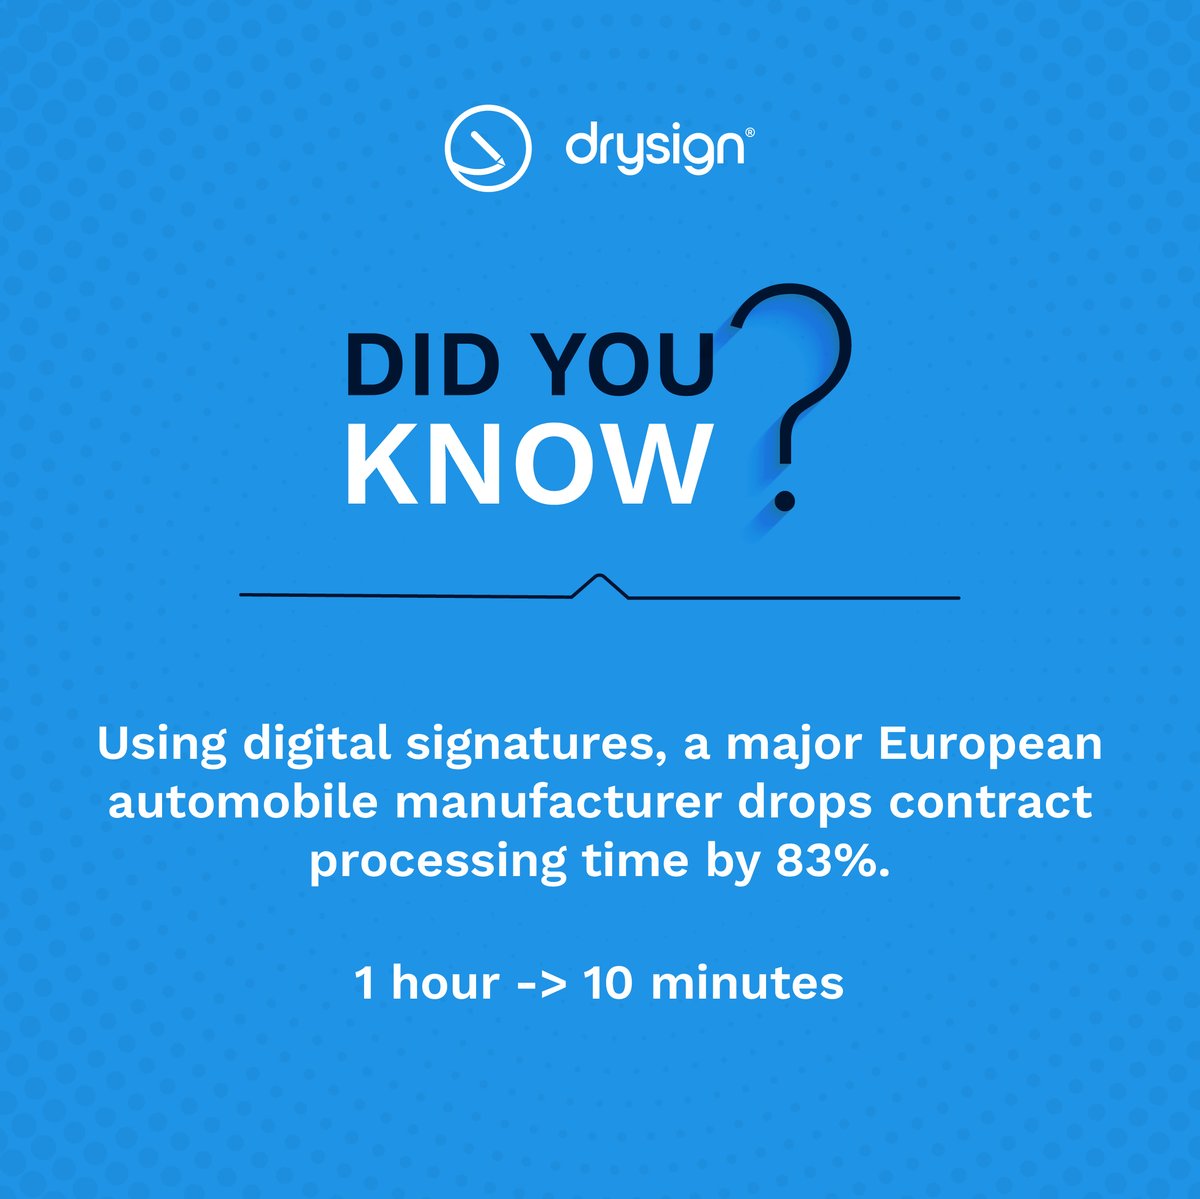 Right from sourcing raw materials to driving out of the dealership, DrySign improves efficiency and reduces cost every step of the way.

Need help? Get started now: ow.ly/B6xb50Re9bE

#AutomotiveIndustry #CostReduction #ProcessImprovement #DigitalSolutions #eSignatures